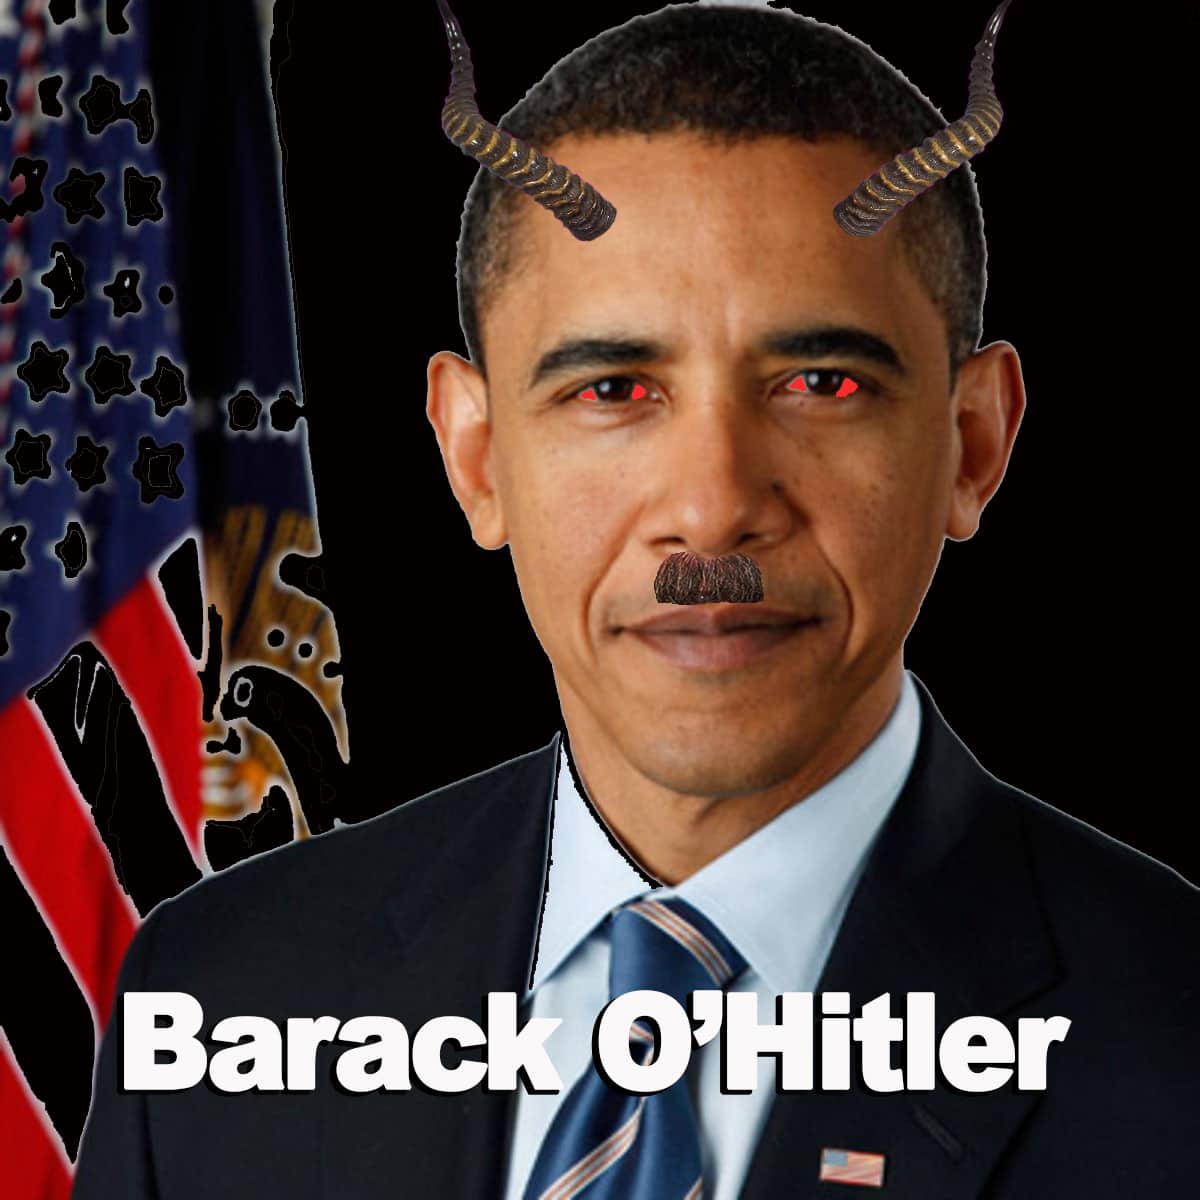 A Voice Of Rationality Creator Of Barack OHitler Meme Calls For